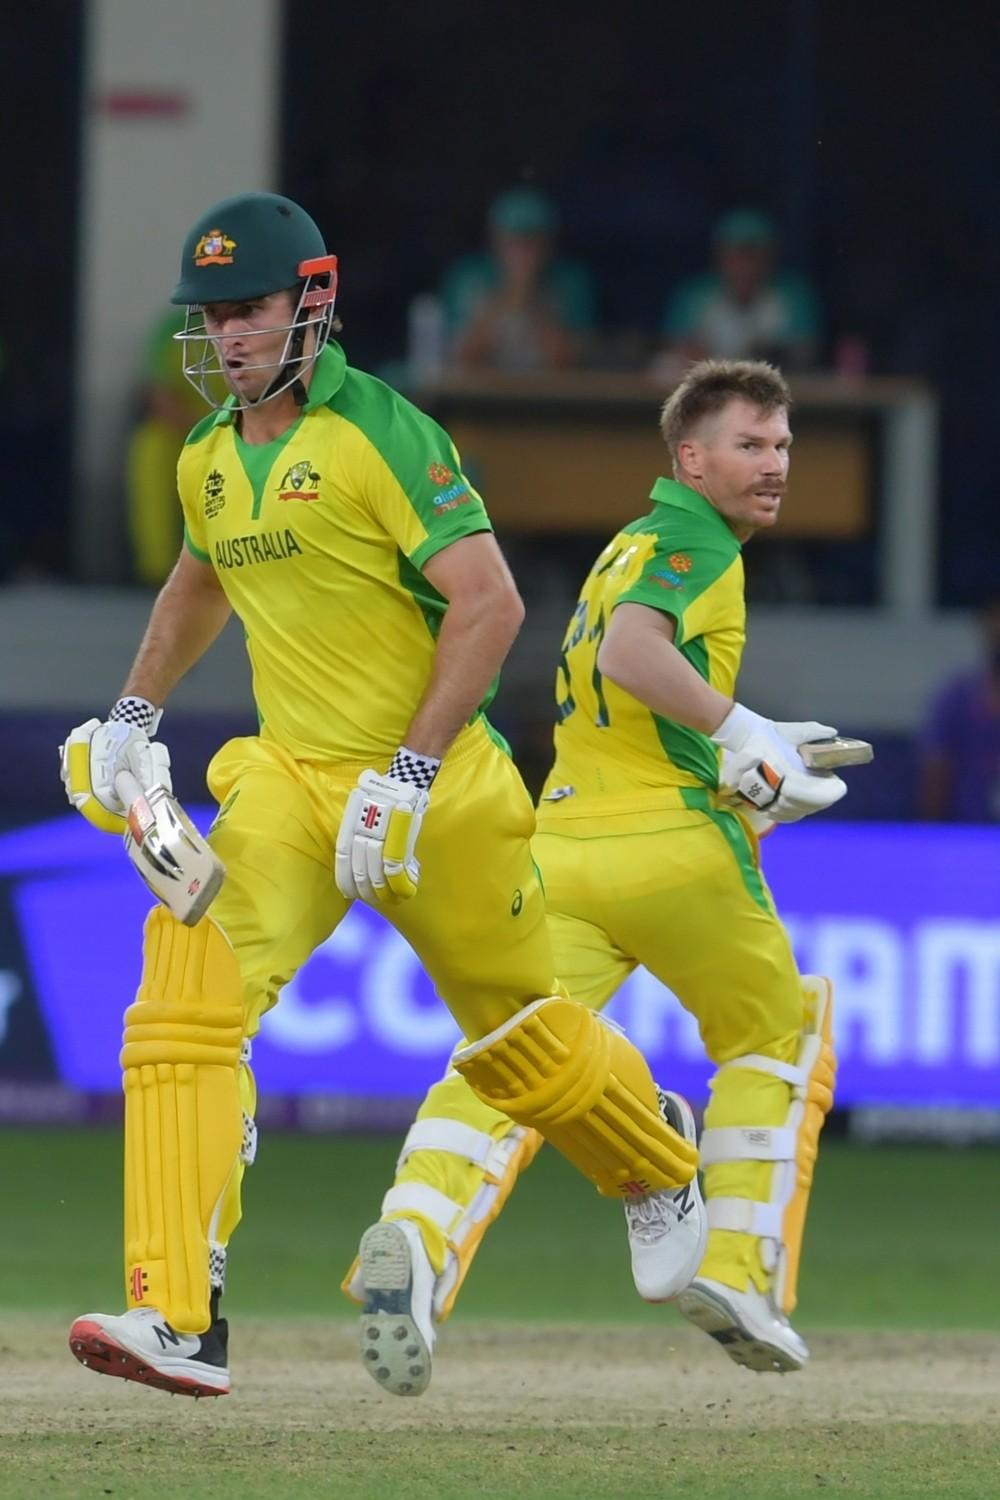 The Weekend Leader - Called up coach Langer to say I want Warner in team: Australia skipper Finch